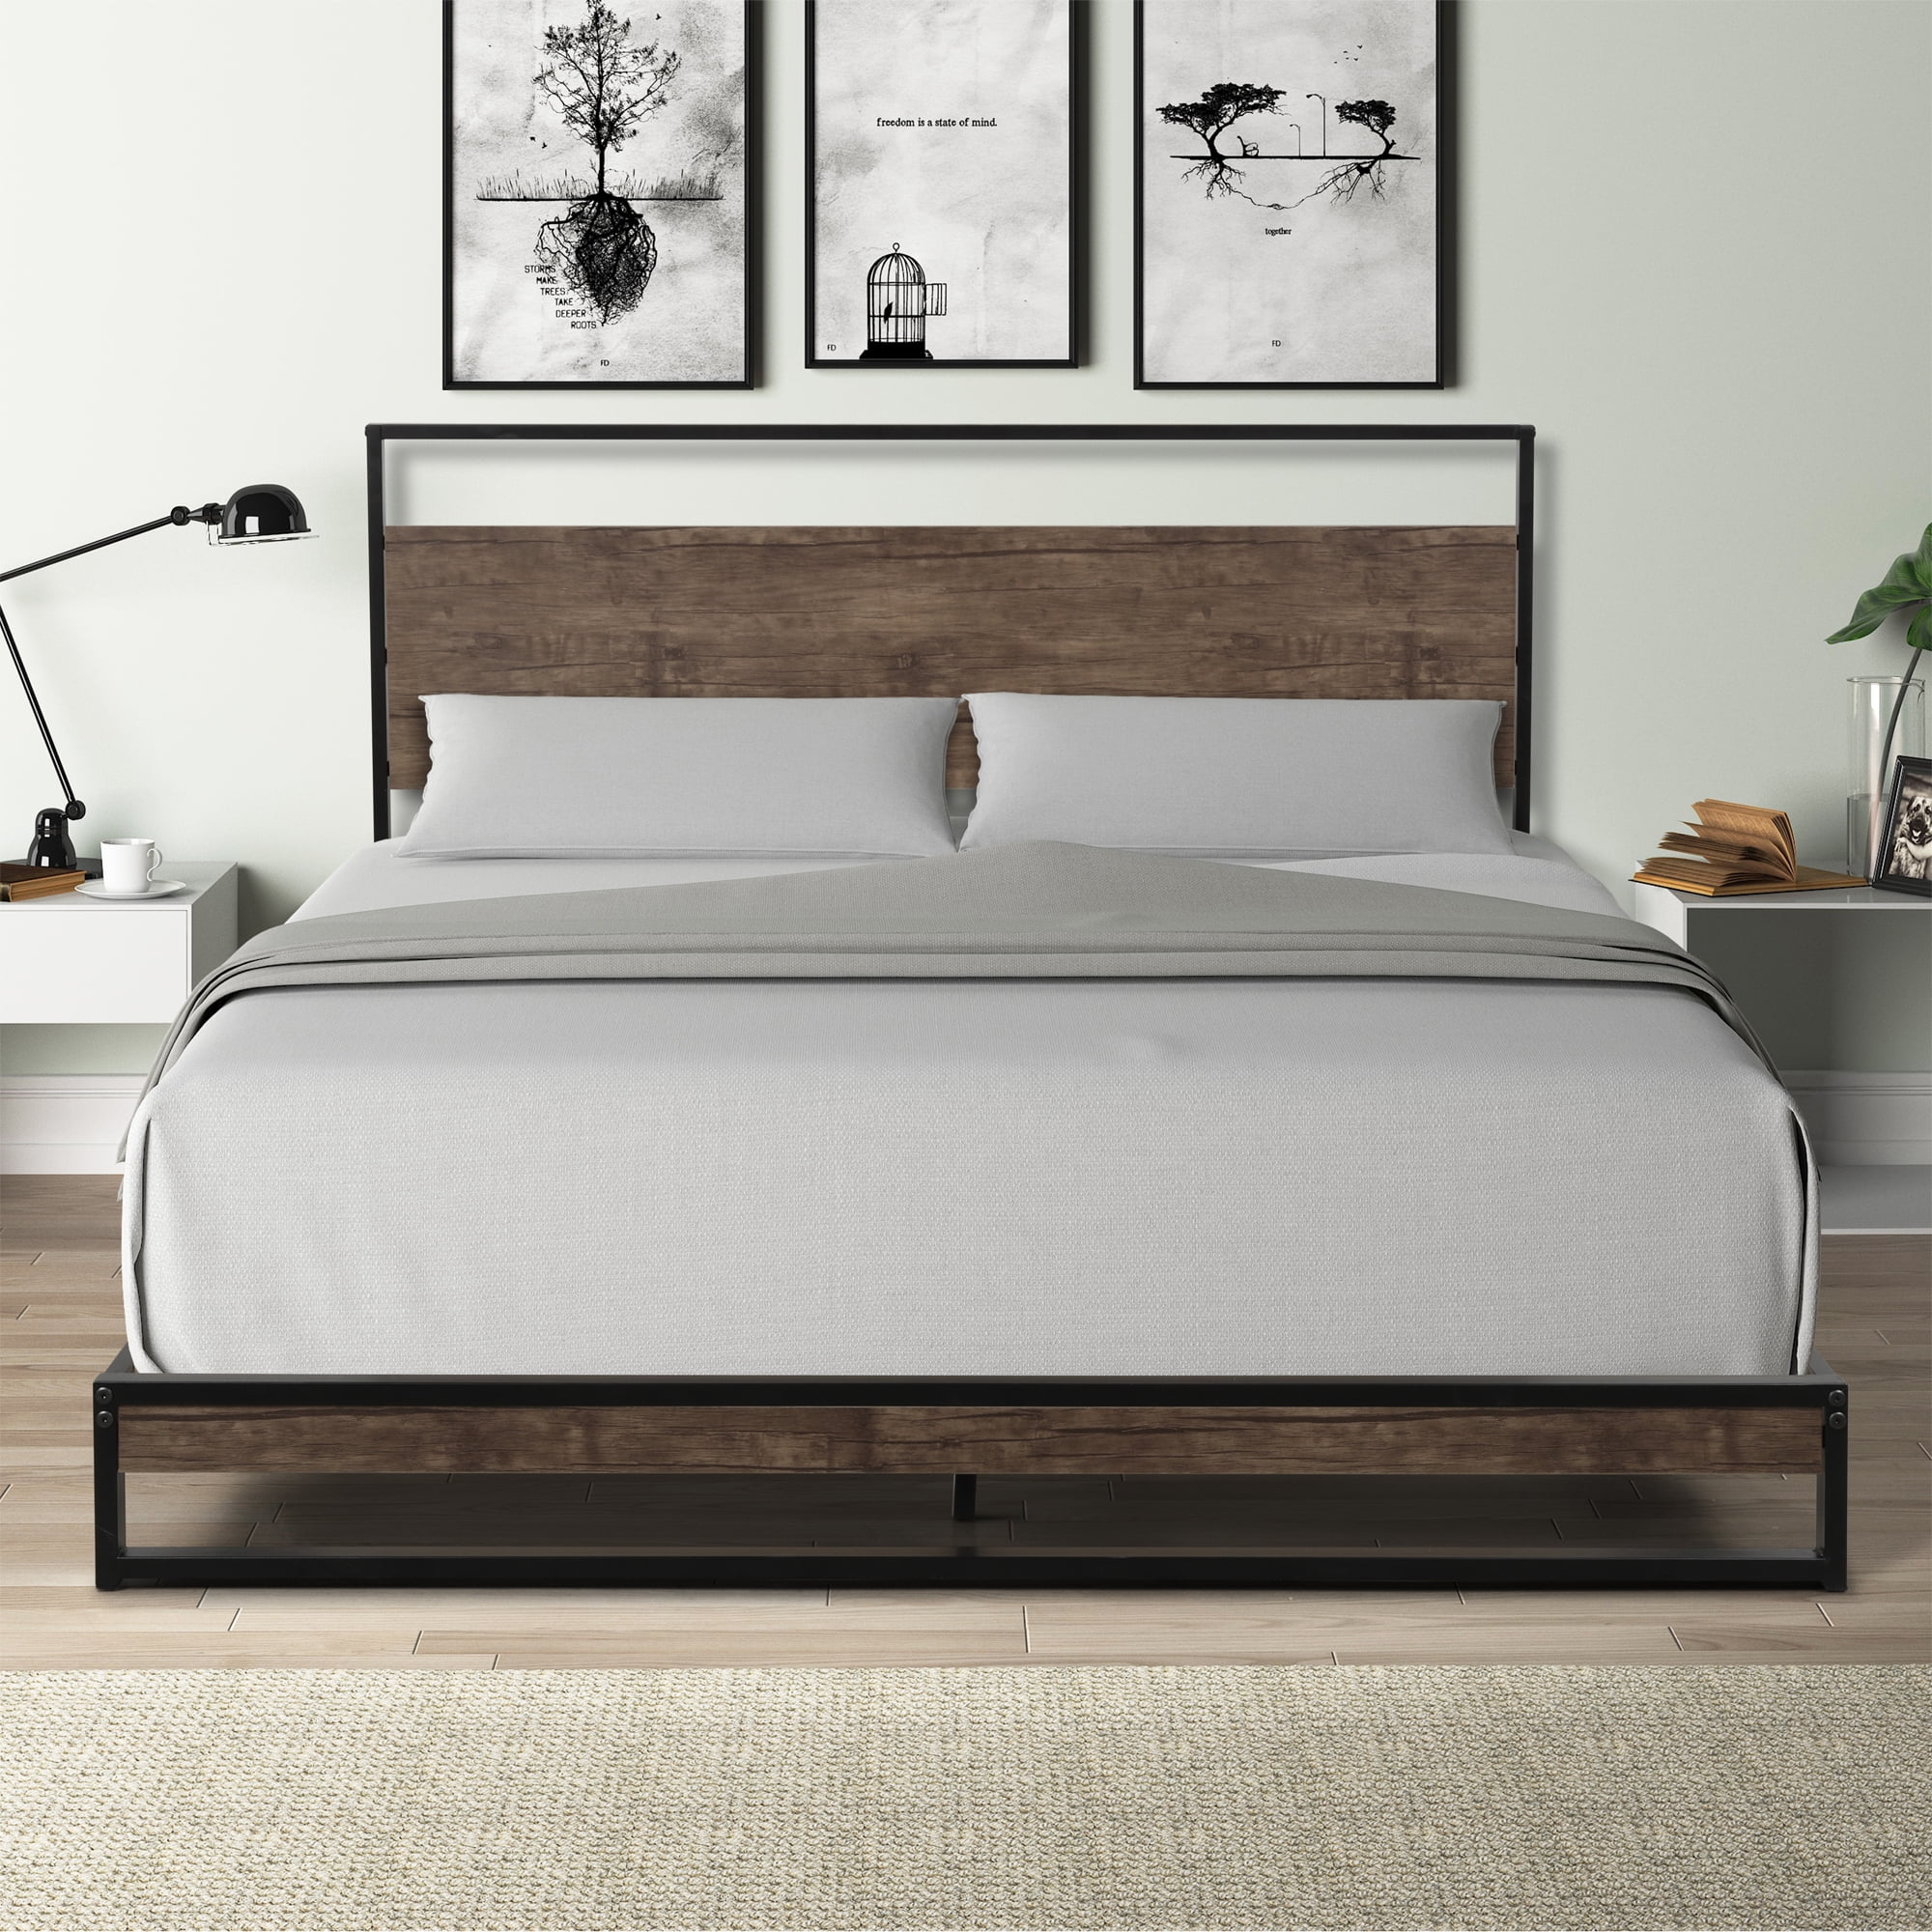 Platform Bed Frame Queen Size, Low Profile Queen Size Bed Frame